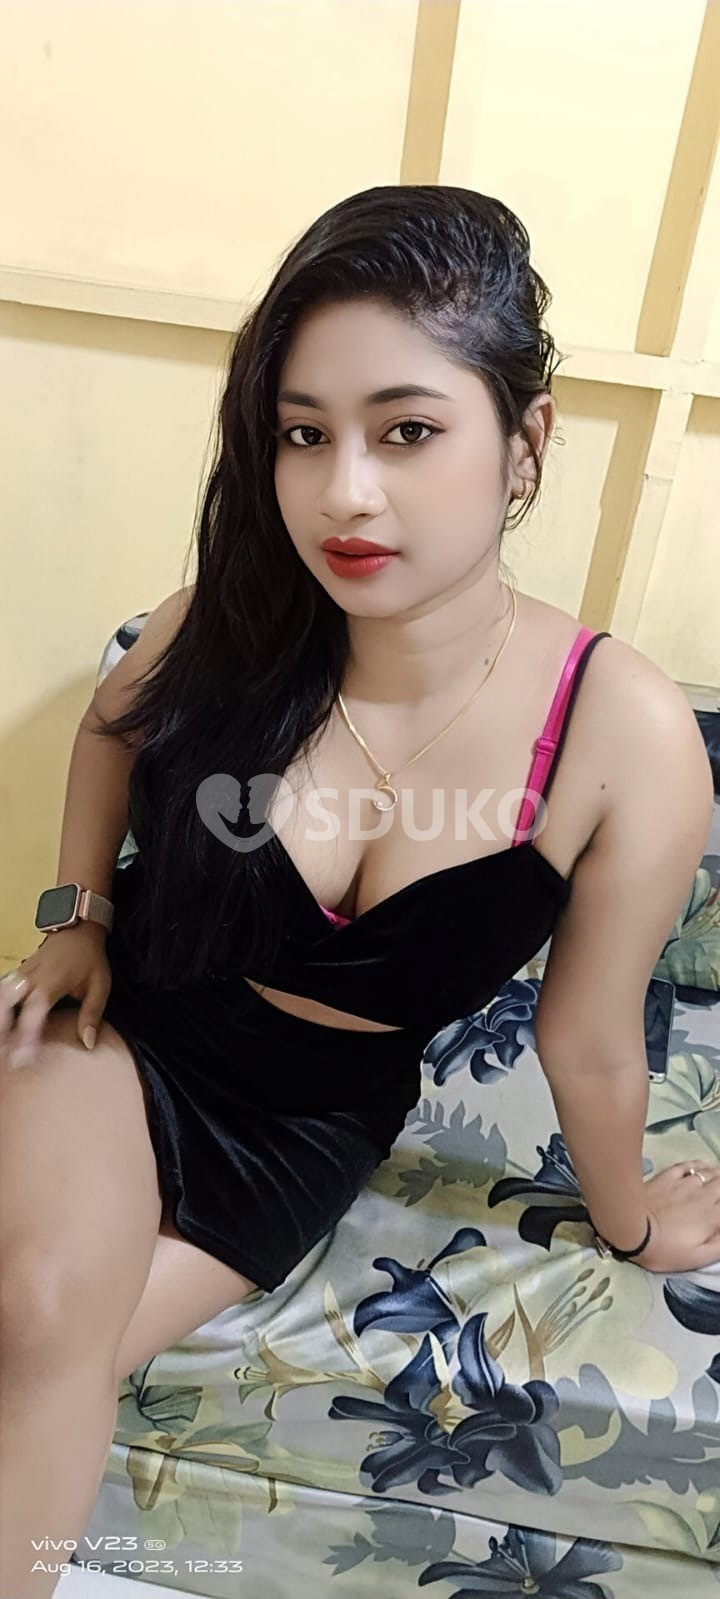 Ajmer road/ Best call girl /service in low price high profile call girl available call me anytime